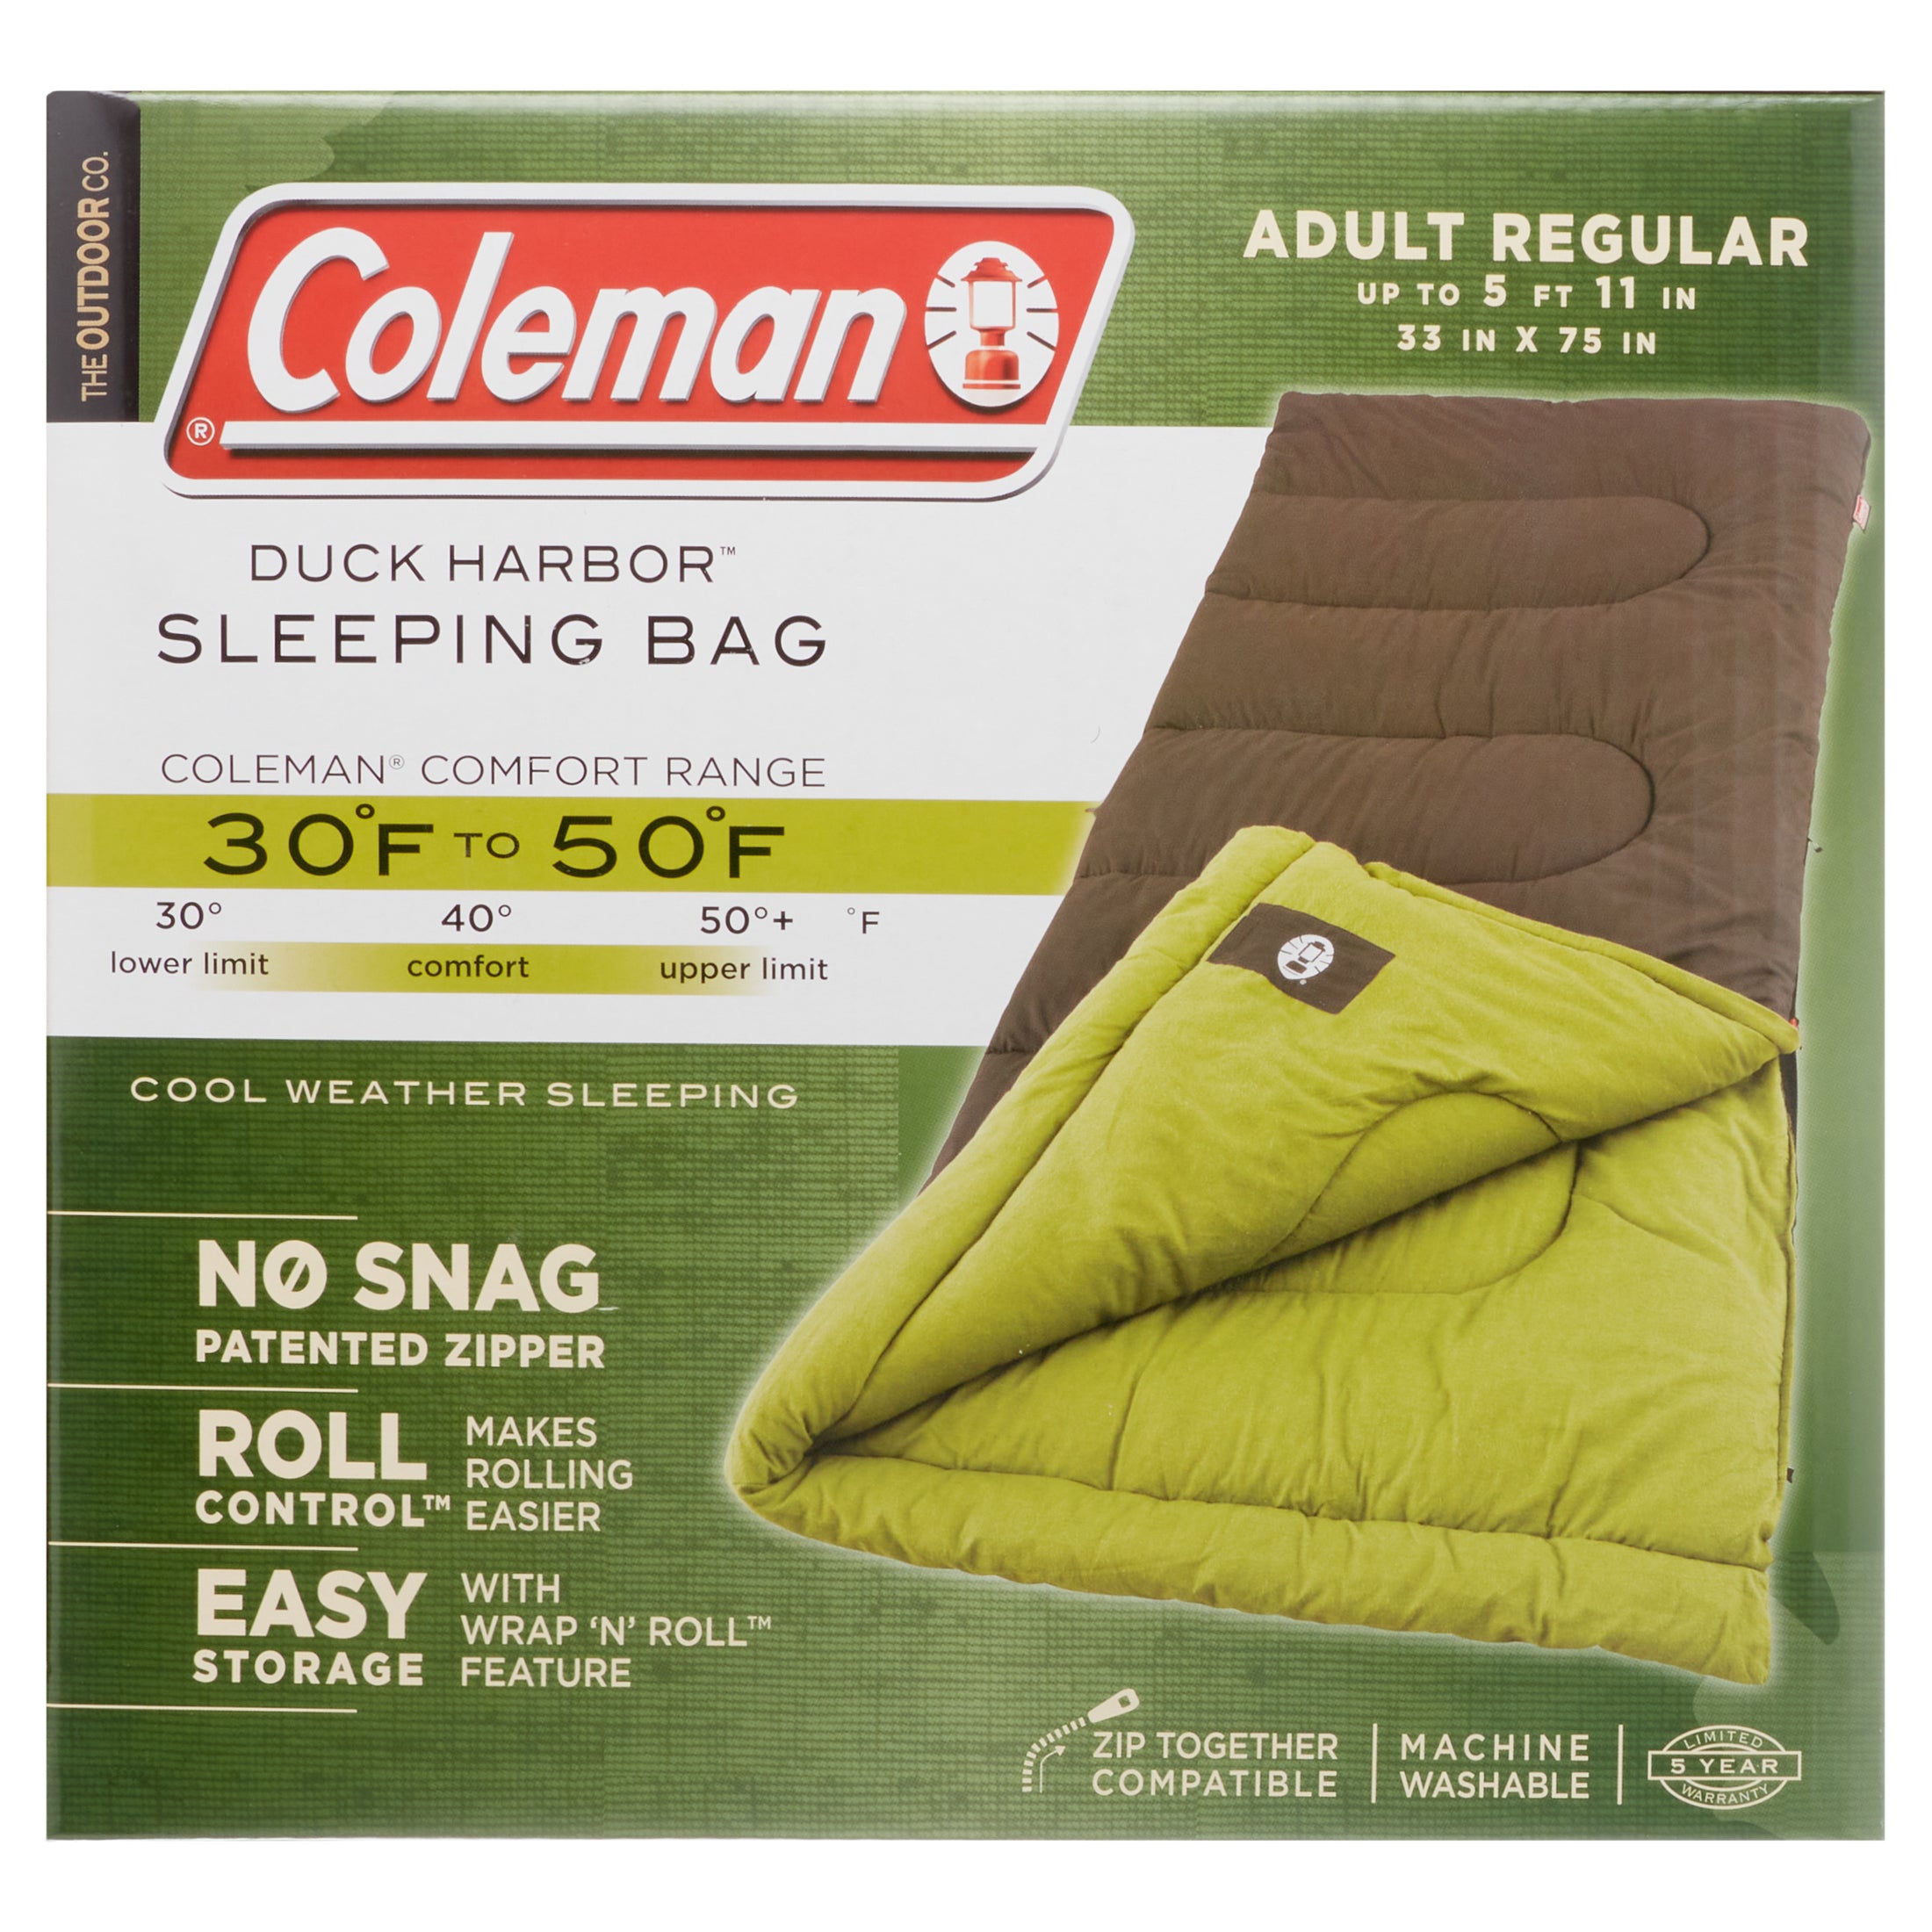 Coleman Adult Sleeping Bag Harbor Cool Weather 40 degrees F Cotton Cover-sleeping bag-AULEY